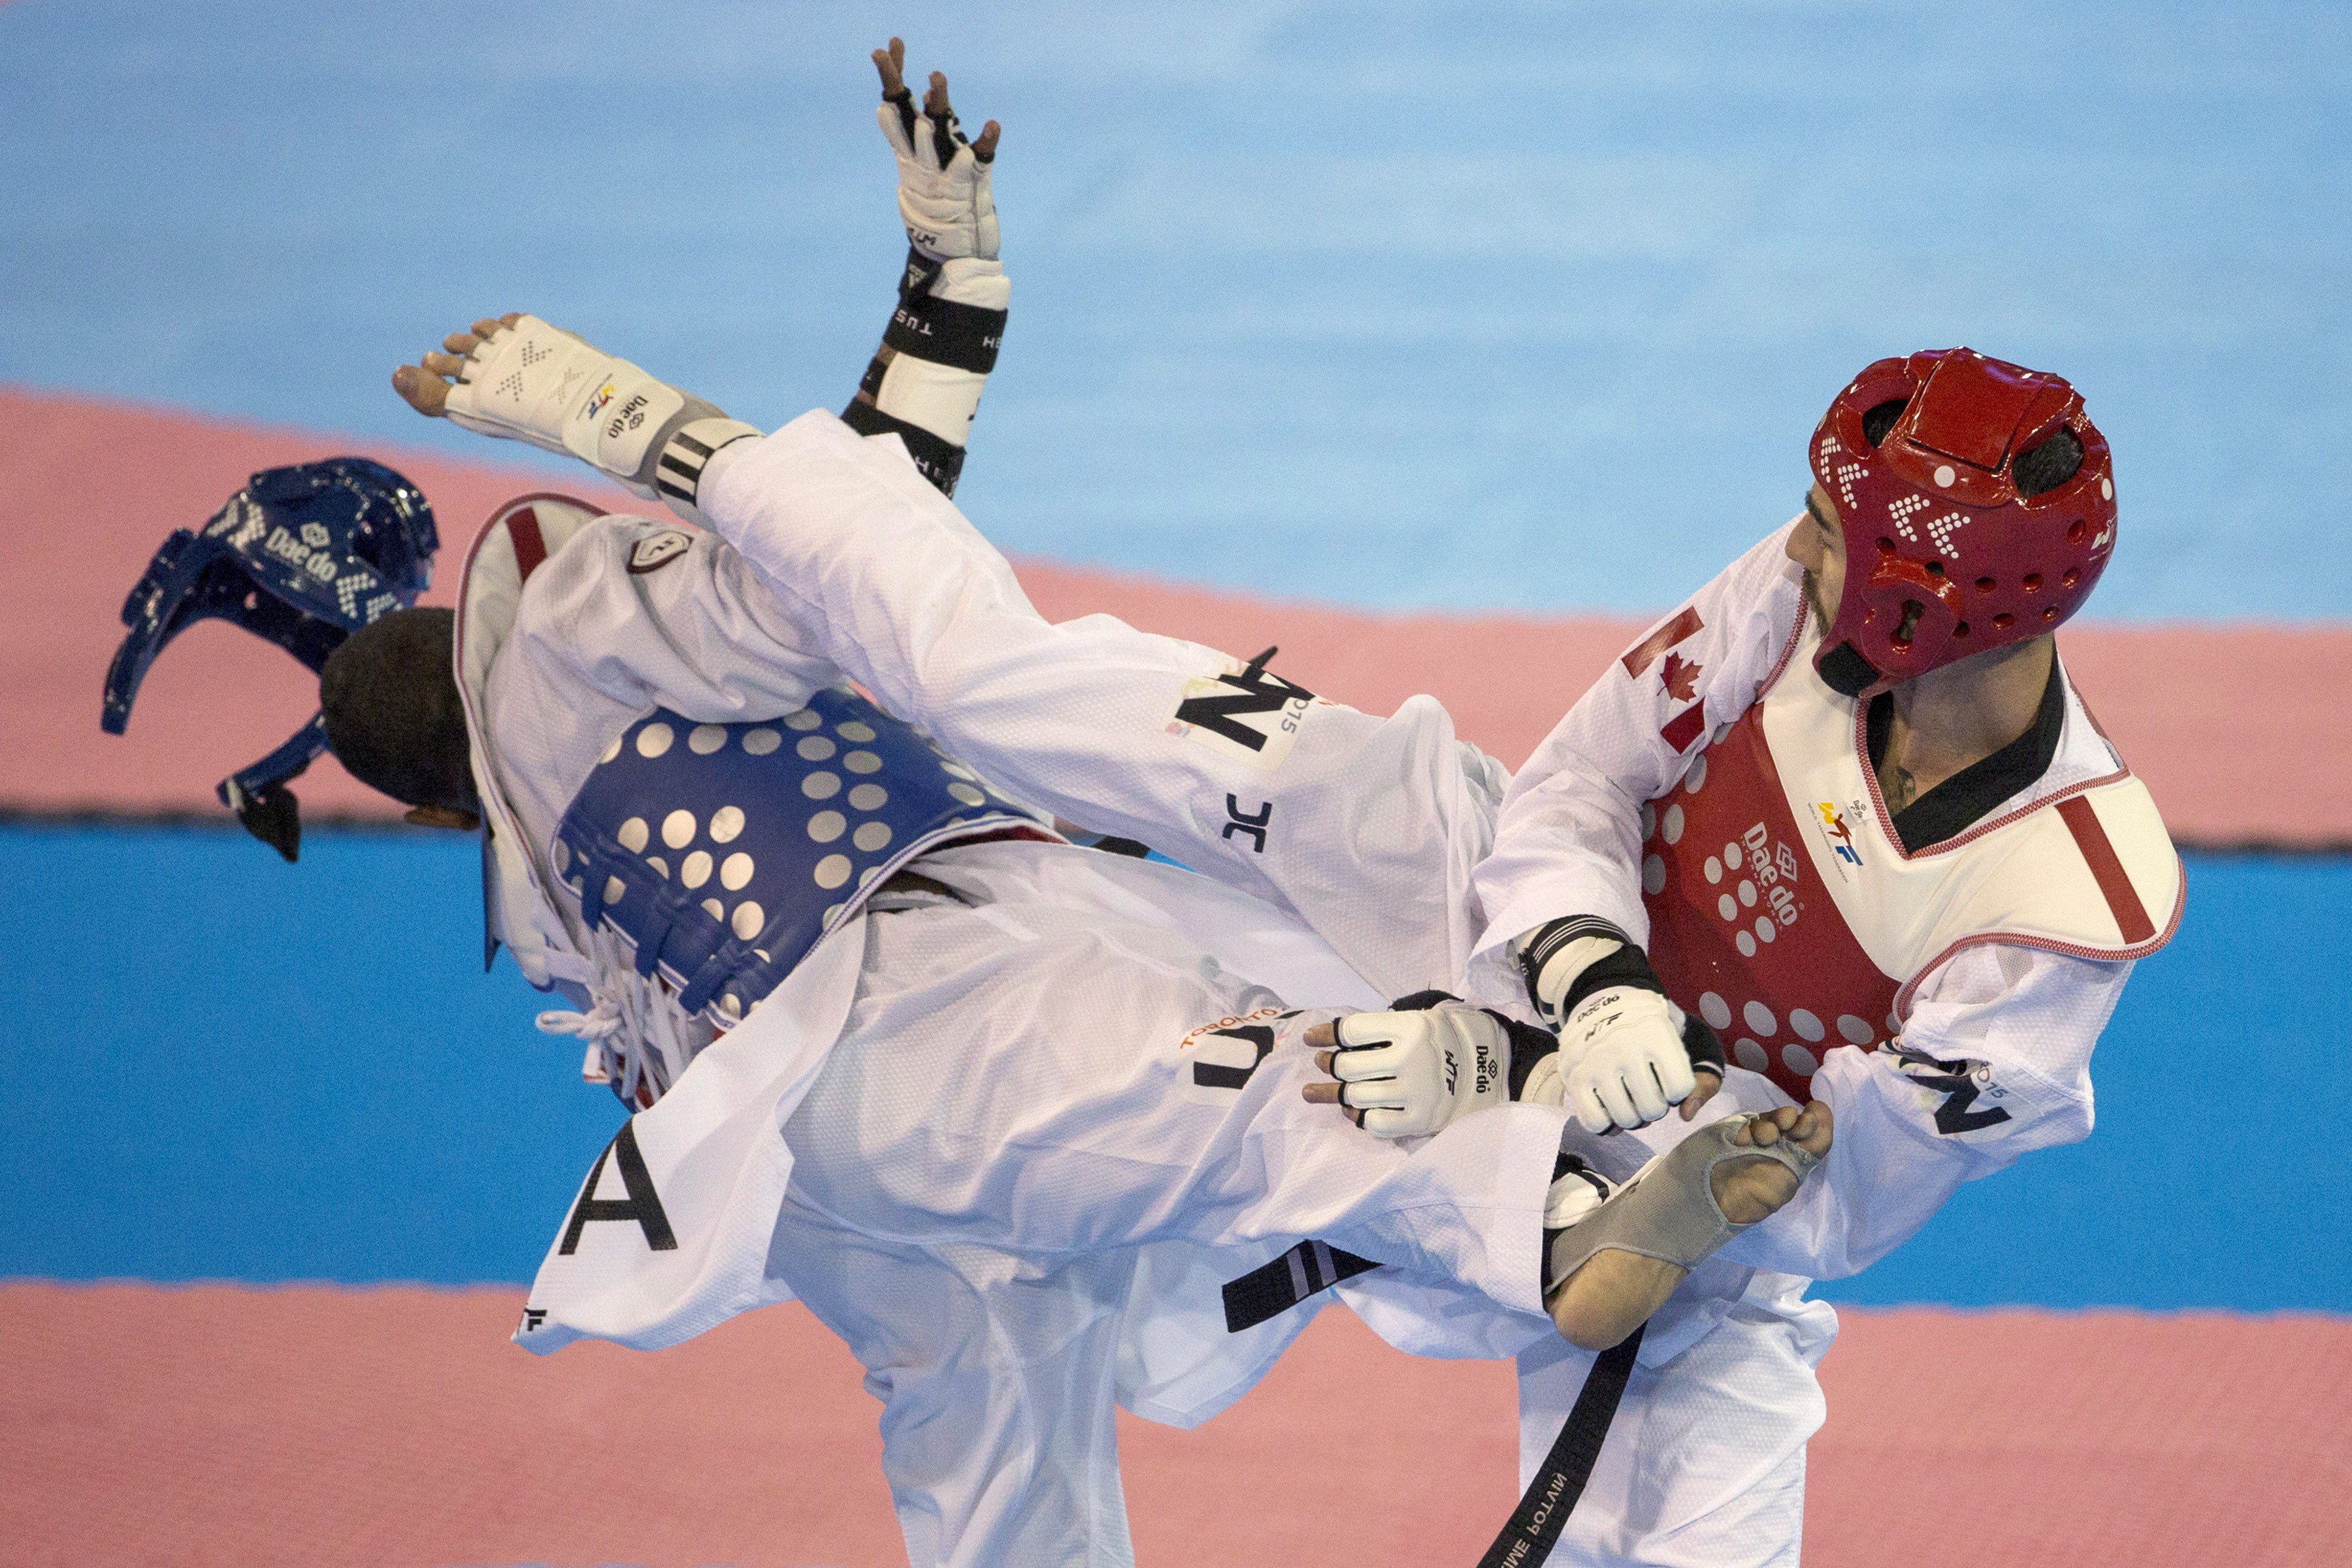 Canada's Maxime Potvin (right) knocks off United States' Terrence Jennings' protective headwear during the men's -68kg semifinal taekwondo contest at the Pan Am games in Mississauga, Ont., on Monday, July 20, 2015. THE CANADIAN PRESS/Chris Young